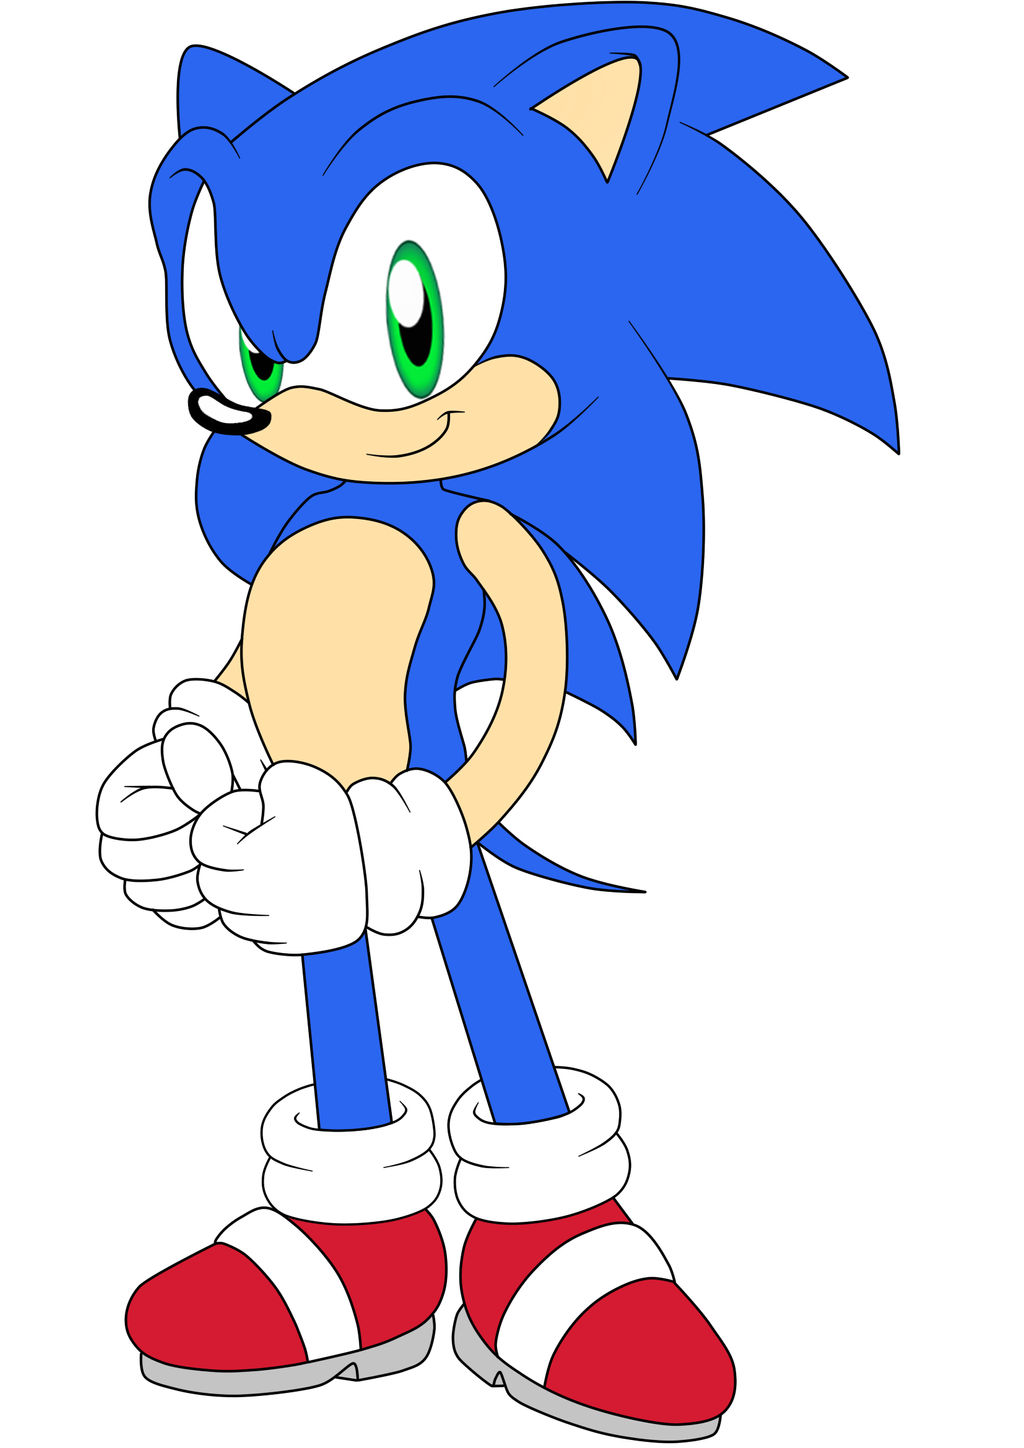 Sonic Classic Adventure by LEETPRIME on DeviantArt